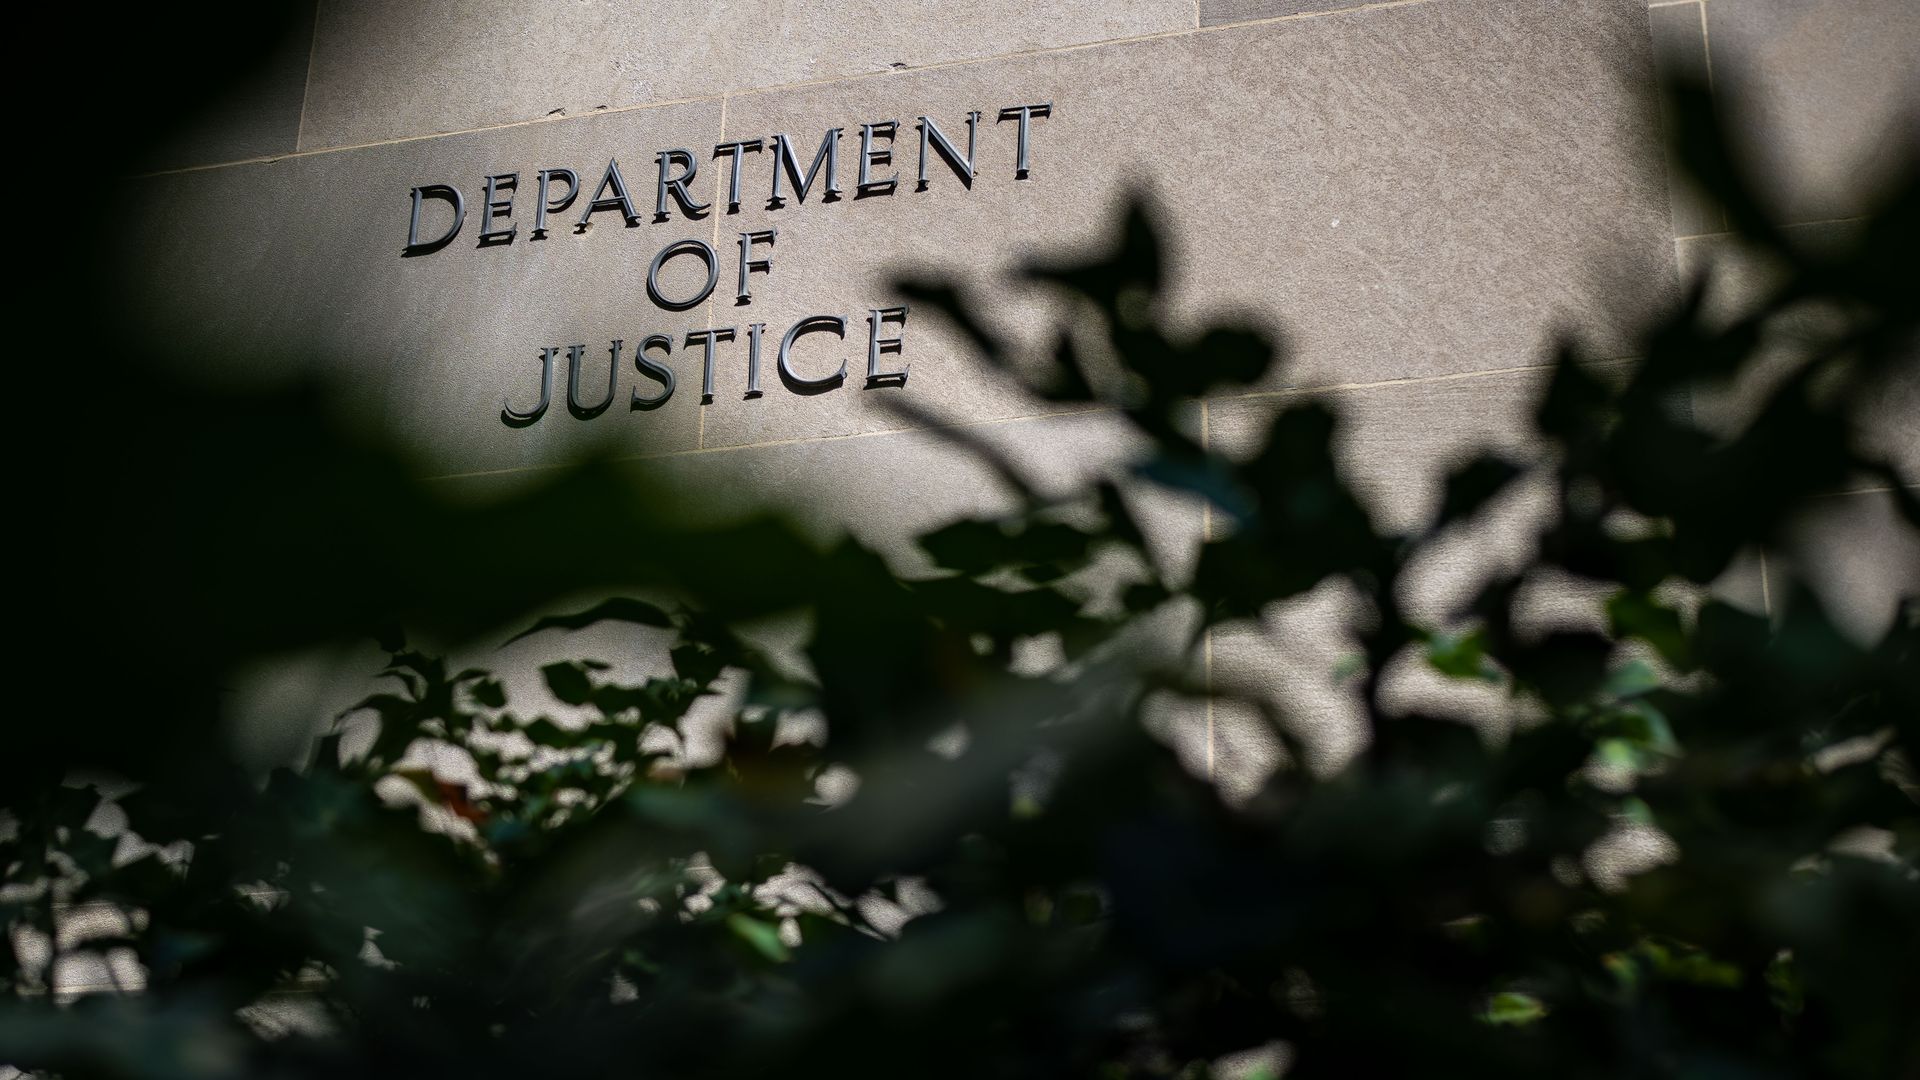 The Department of Justice (DOJ) building on Thursday, Aug. 18, 2022 in Washington, DC.